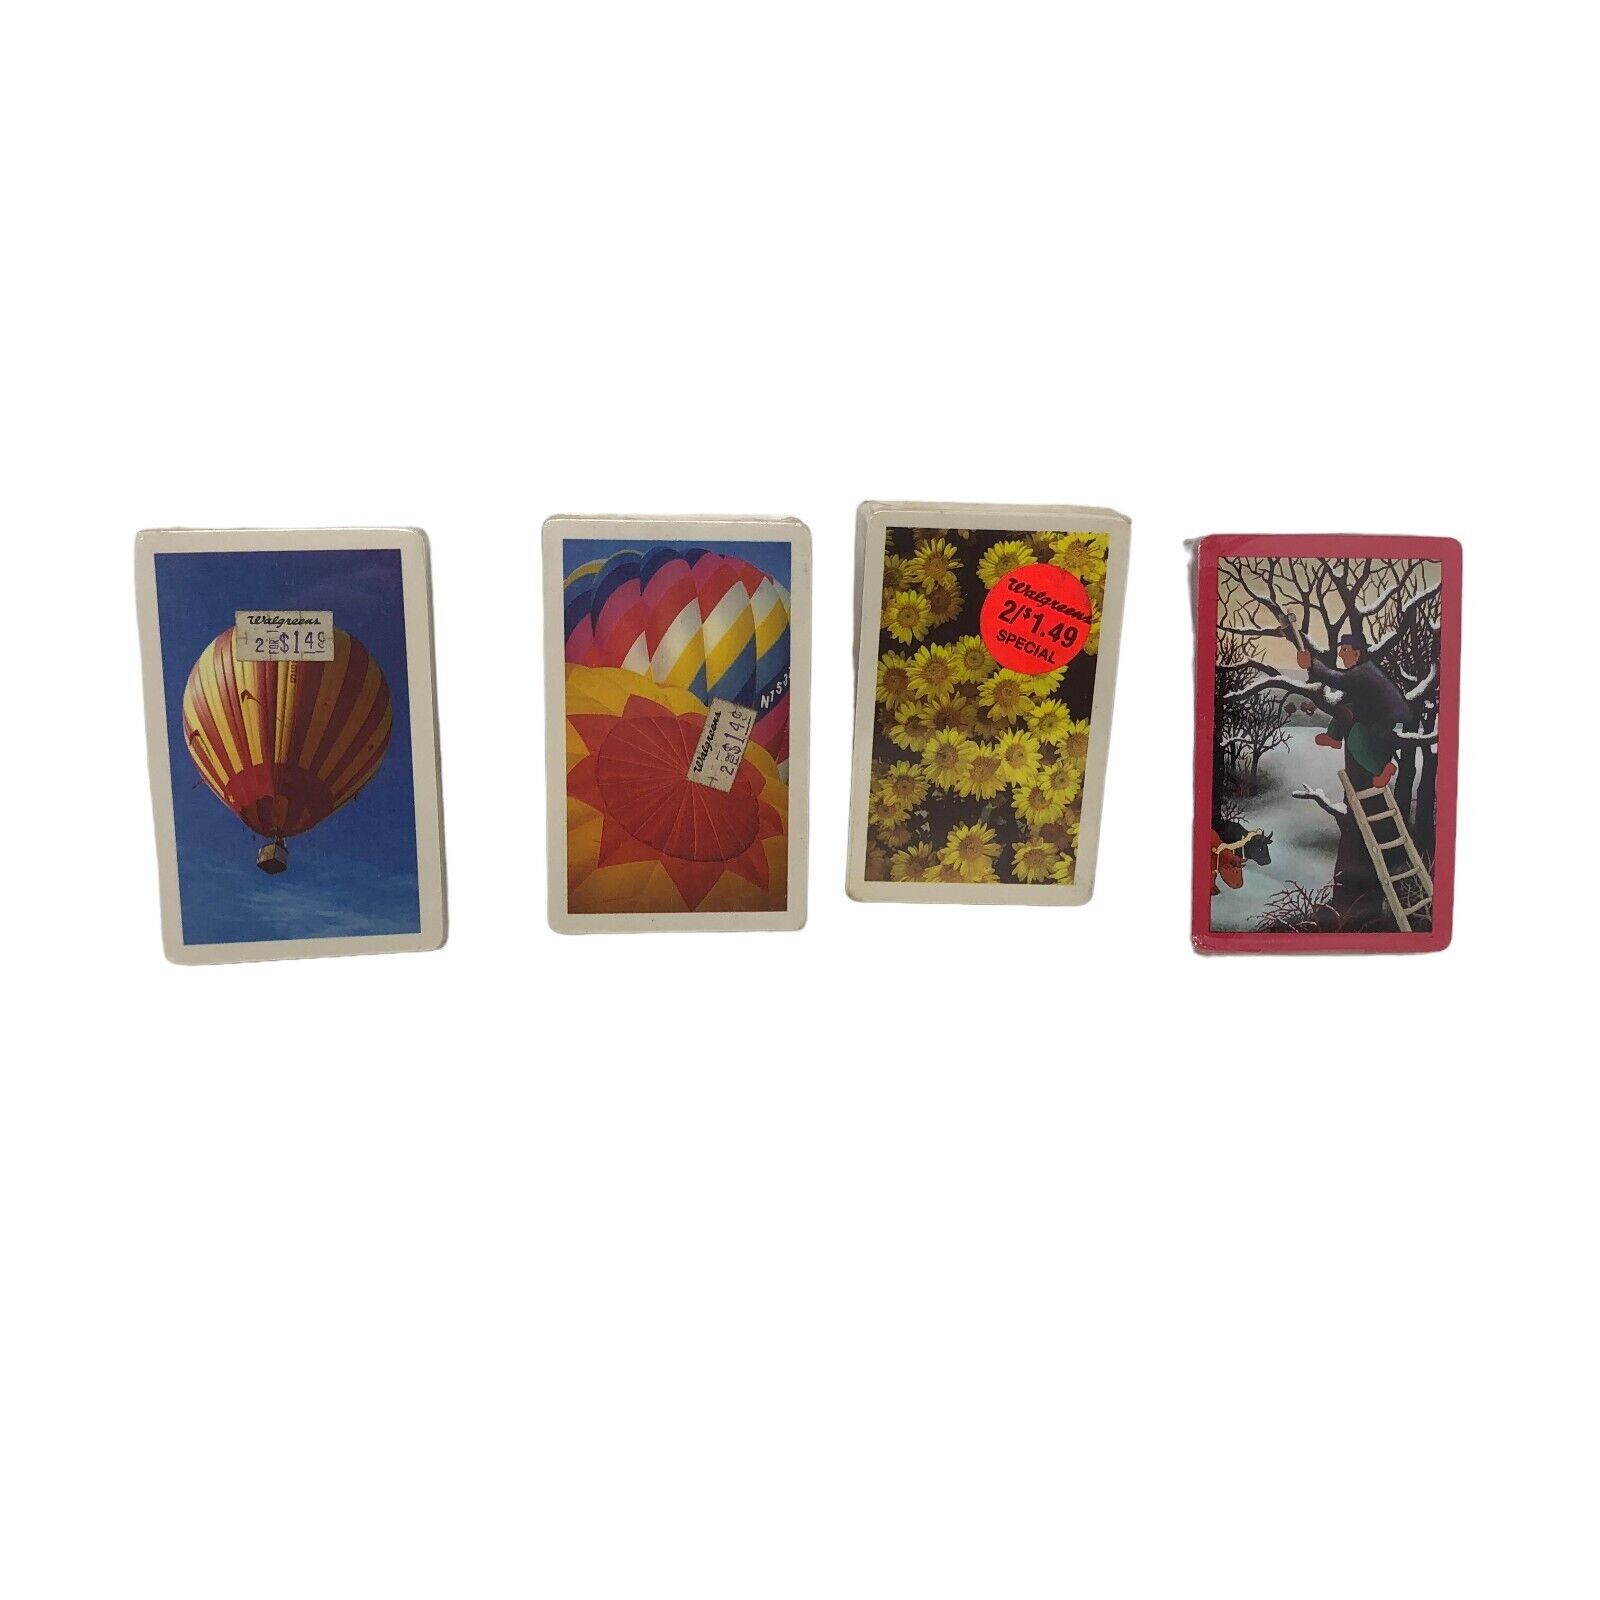 VTG Lot of 4 Arrco Playing Cards Chicago Made in USA Hot Air Balloons Sunflowers